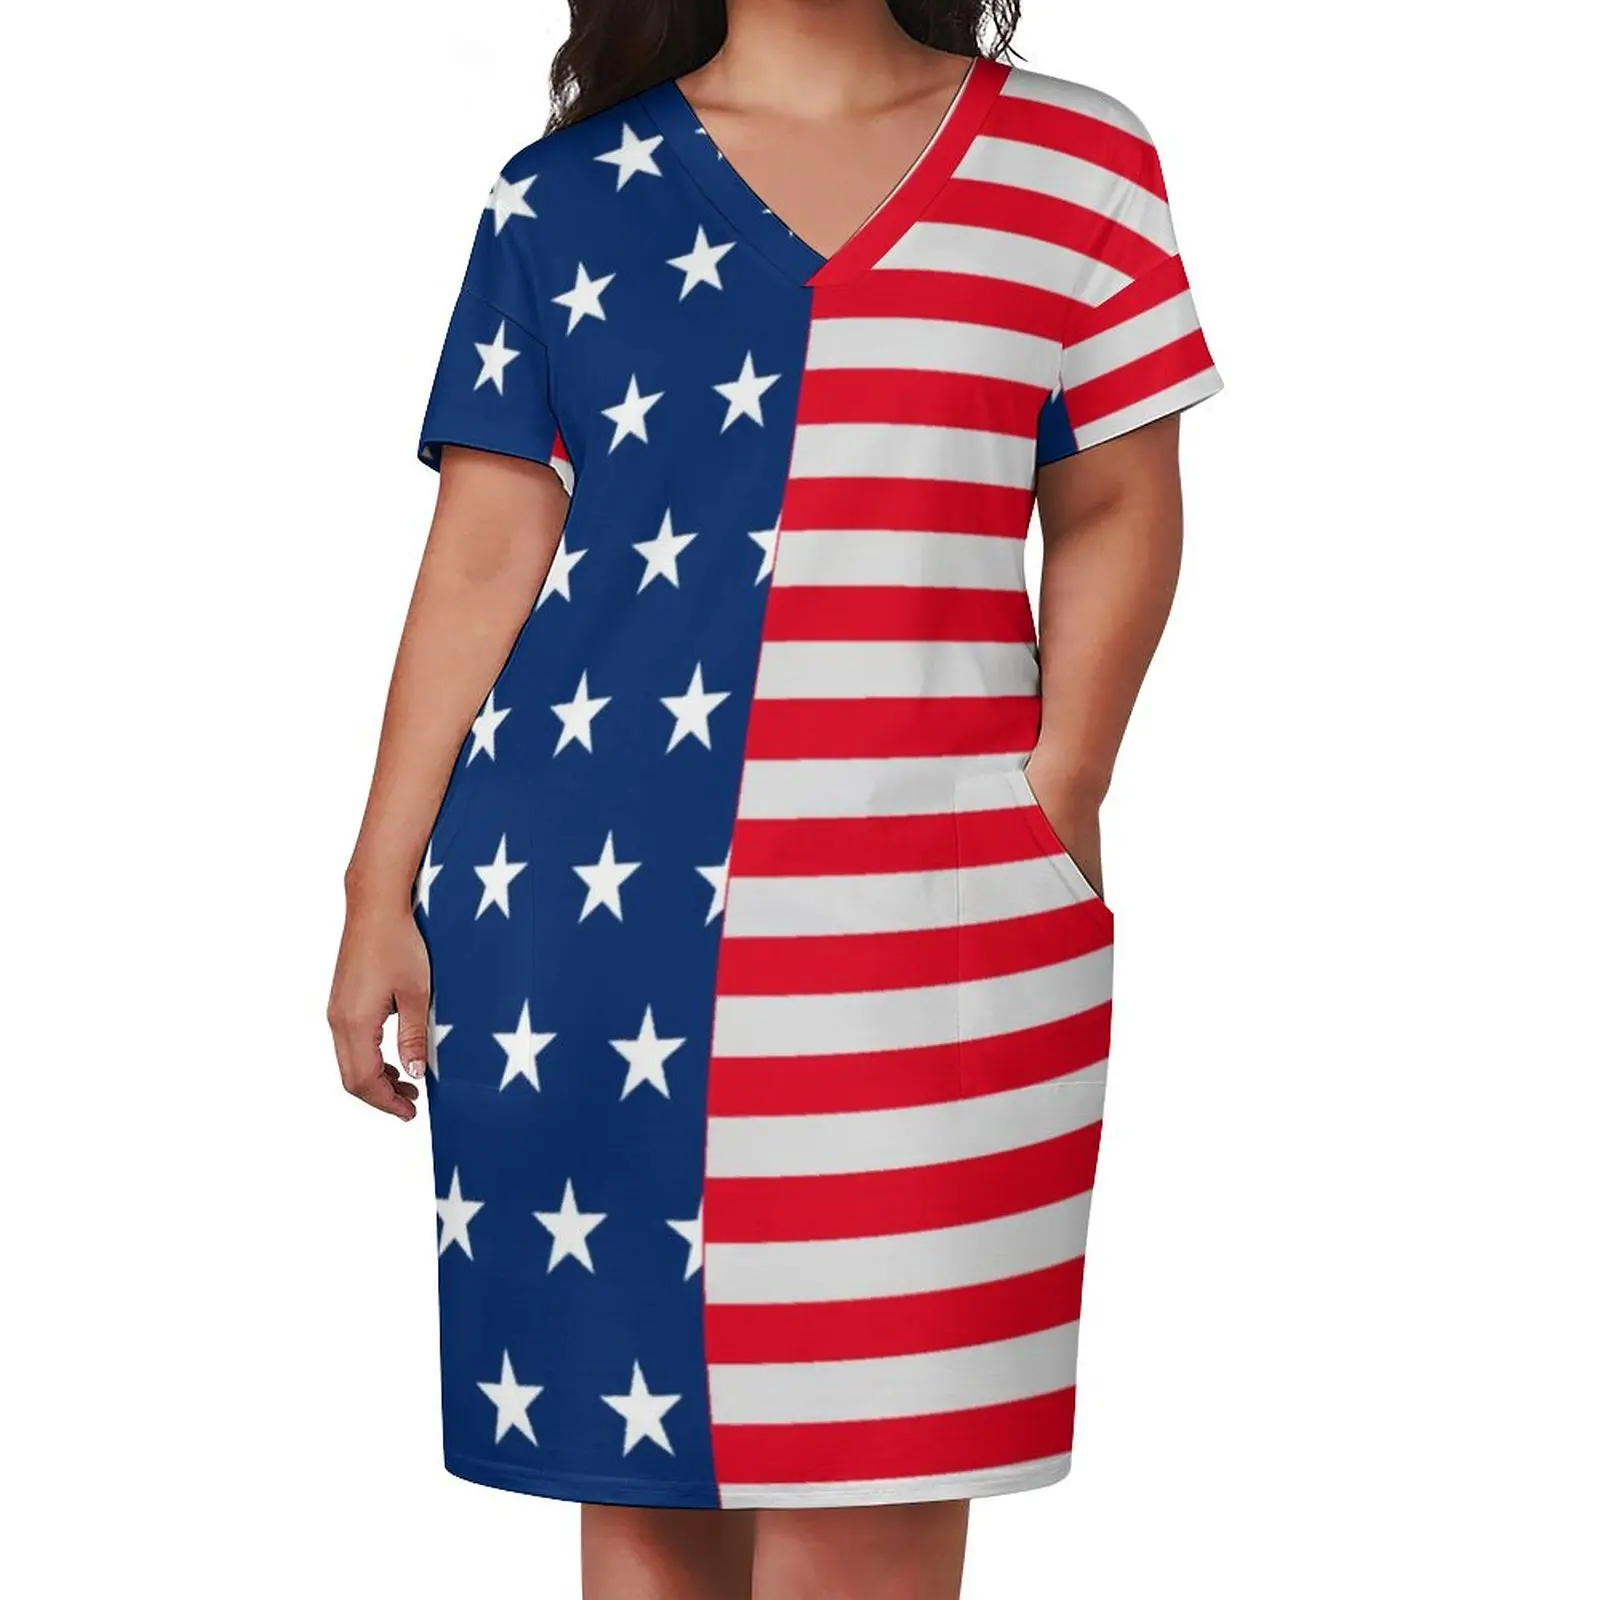 USA Flag Print Dress V Neck Stars and Stripes Aesthetic Dresses Summer Vintage Casual Dress Women Printed Plus Size Clothing